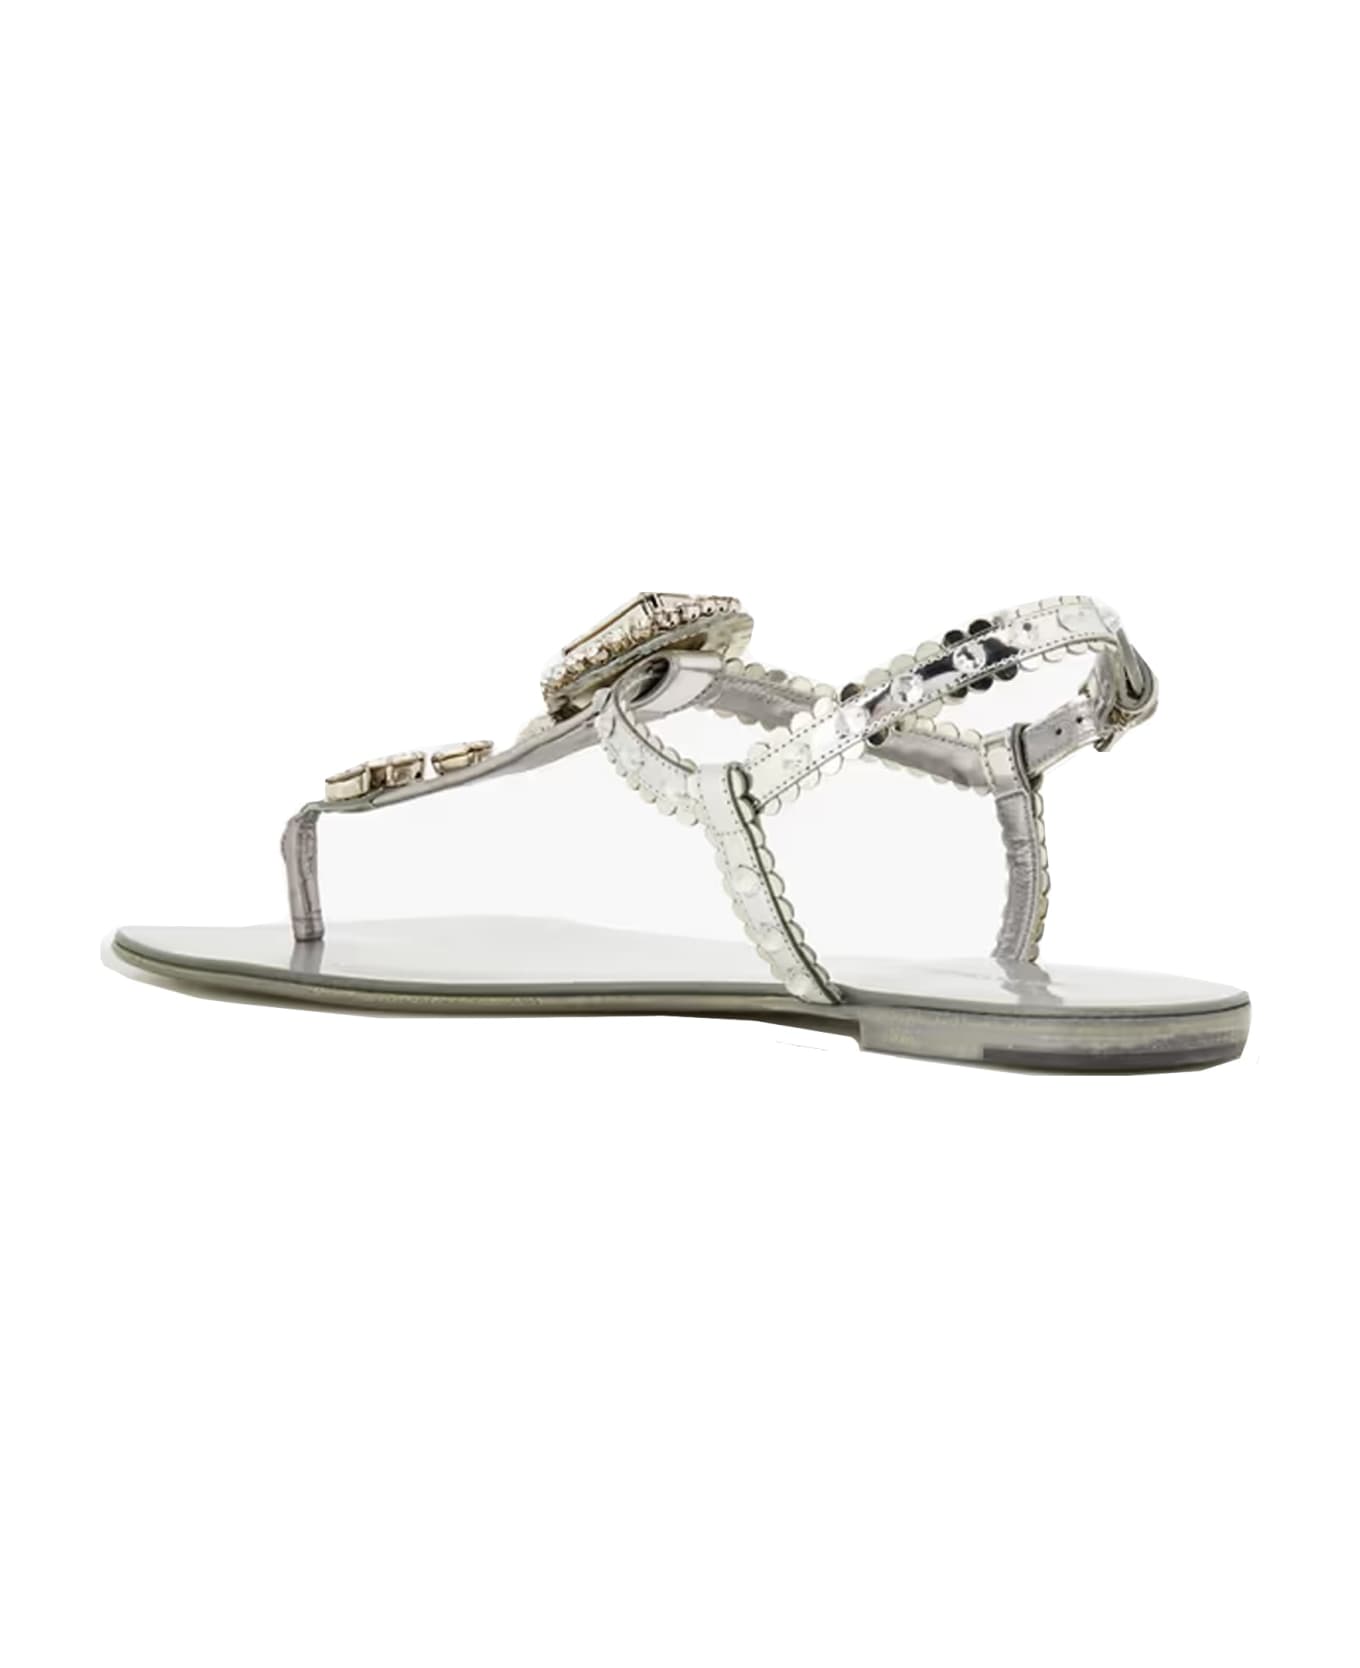 Dolce & Gabbana Crystal Leather Sandals - Silver